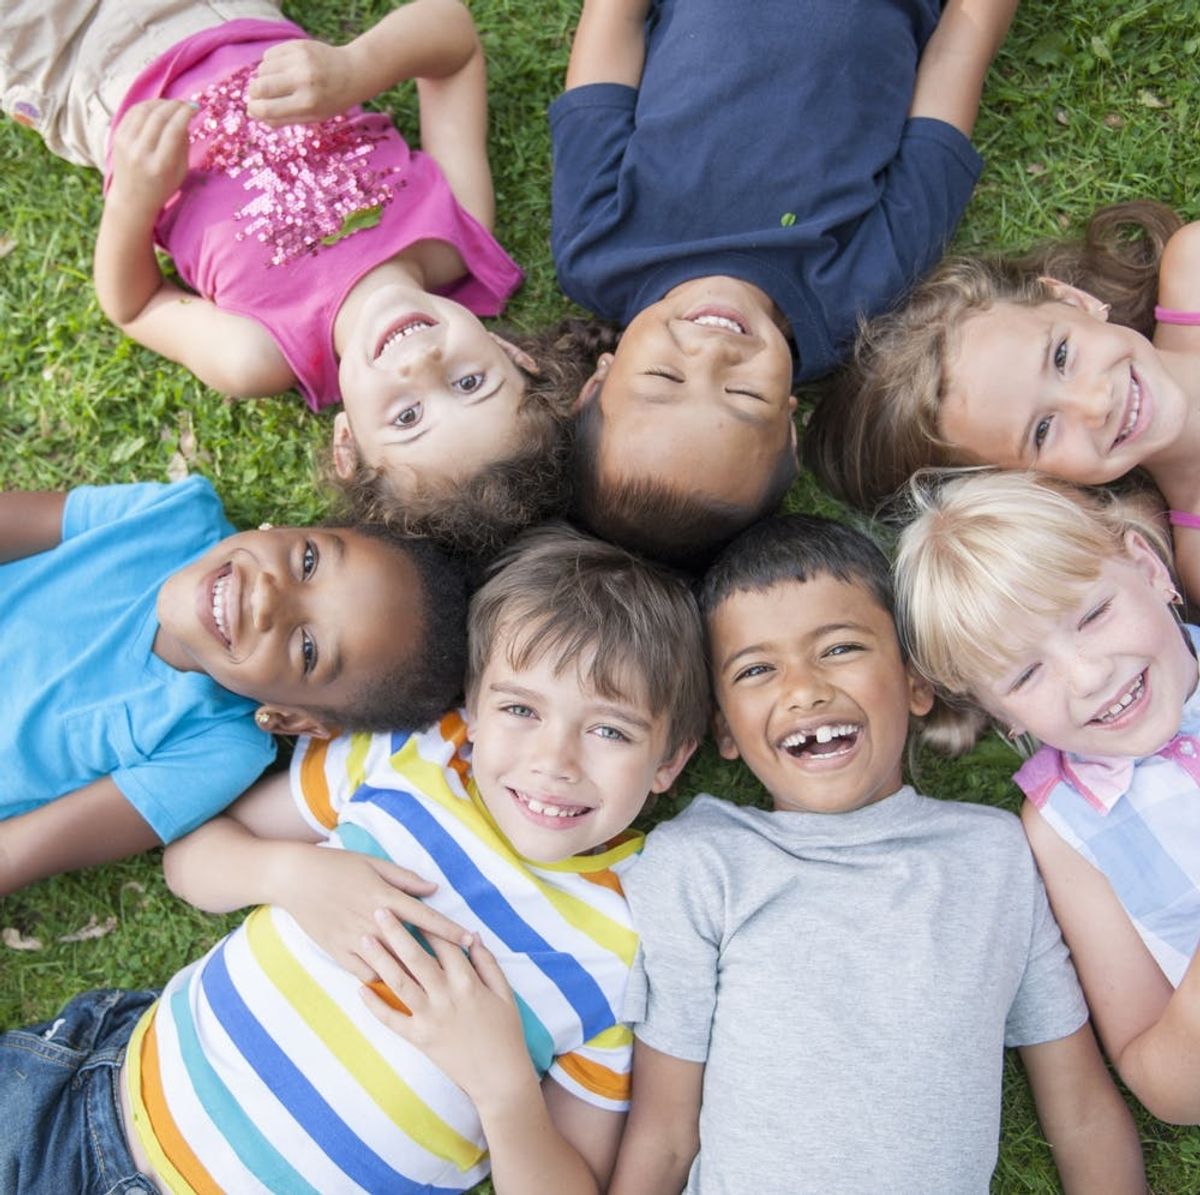 Science Says This Is the Age That Children Begin to Experience the Effects of Racial Bias